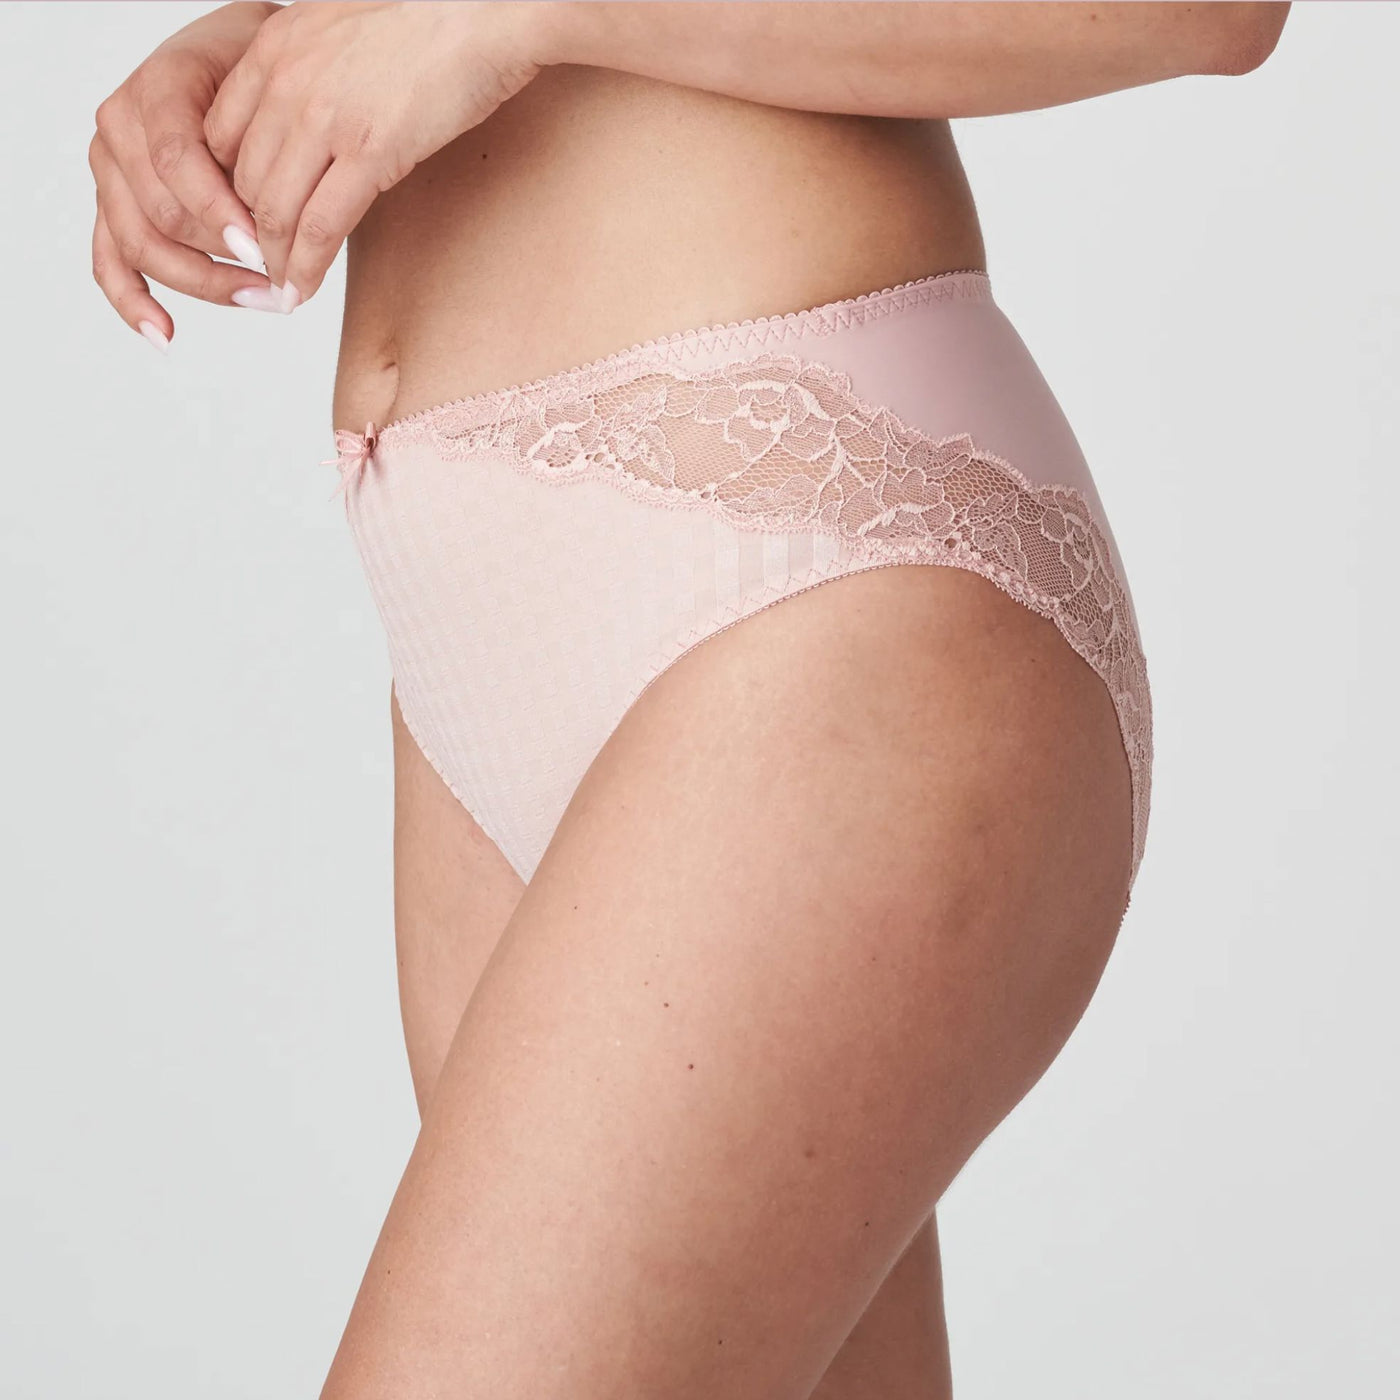 Prima Donna Madison Briefs in Powder Rose 0562126-Panties-Prima Donna-Powder Rose-Medium-Anna Bella Fine Lingerie, Reveal Your Most Gorgeous Self!